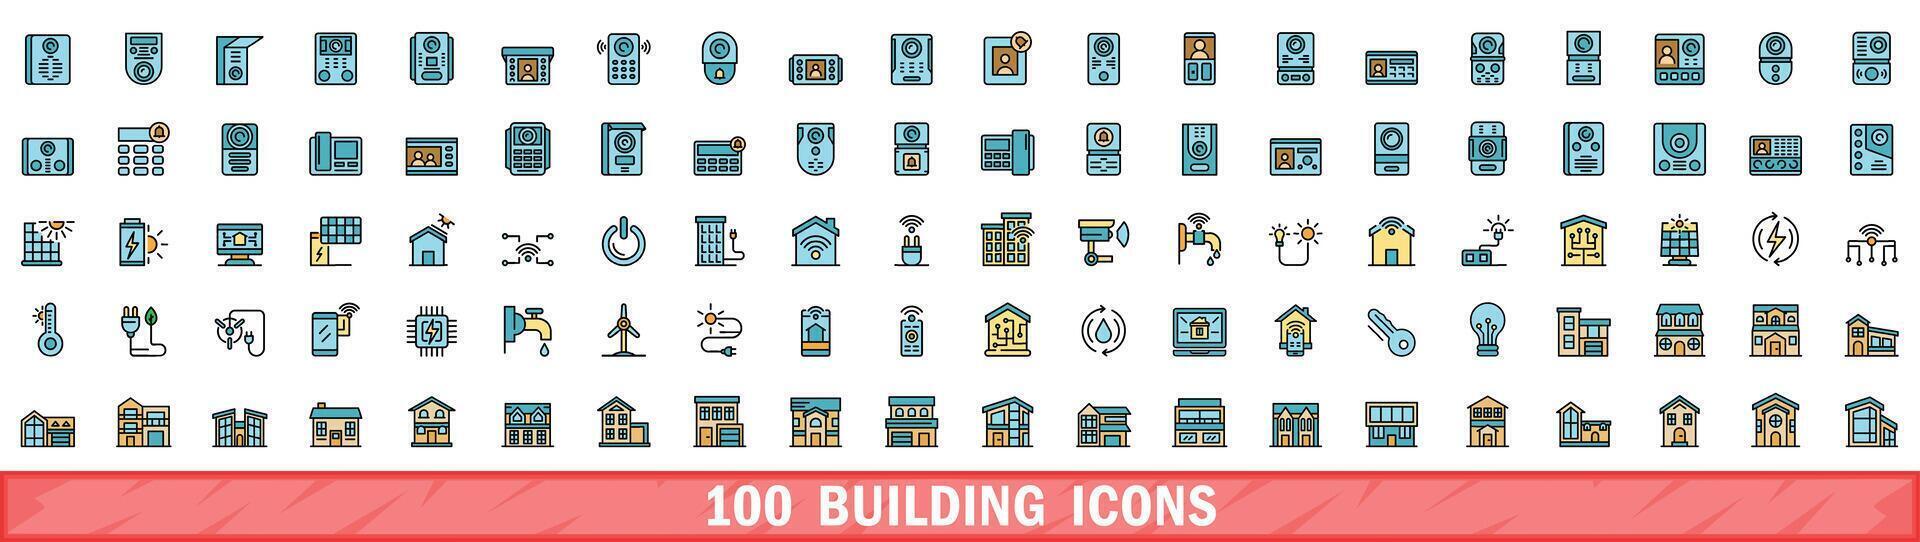 100 building icons set, color line style vector